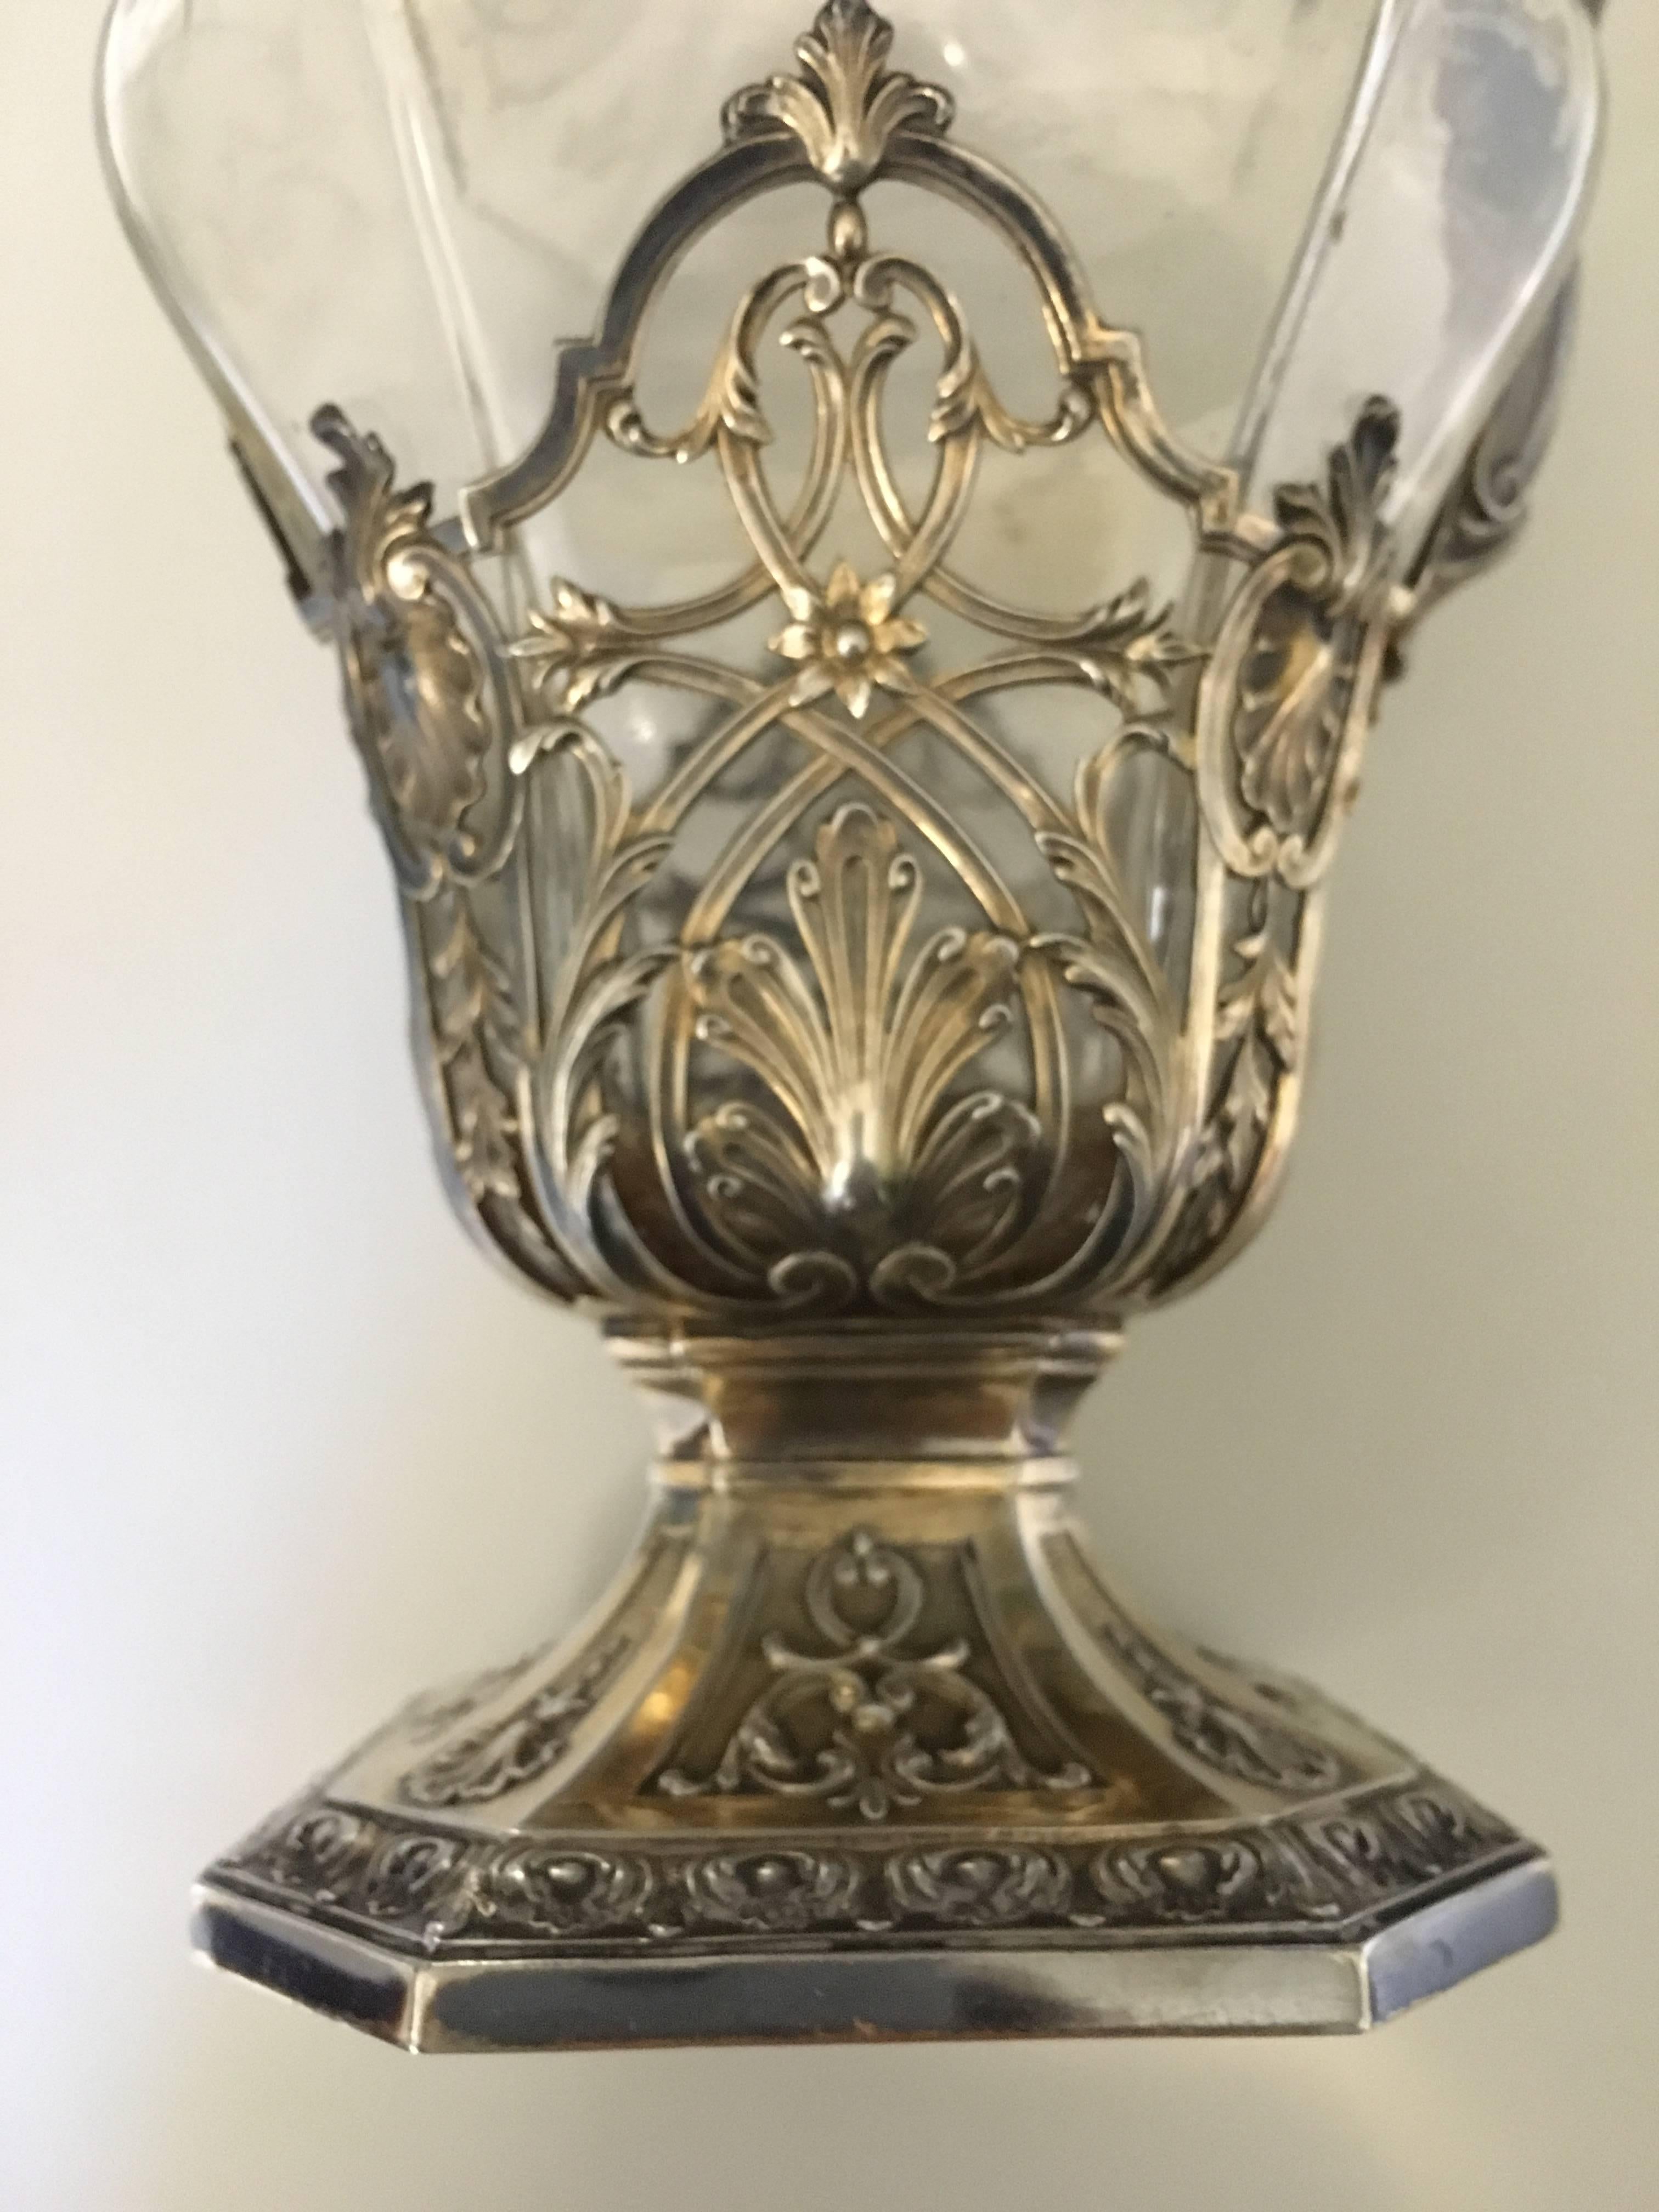 French claret jug mounted with 950 silver and engraved etched crystal, adorned with pattern Louis XVI
(gold) vermeil silver and crystal wine decanter or claret Jug ;antique French hallmarked sterling silver and engraved glass square sections ornate